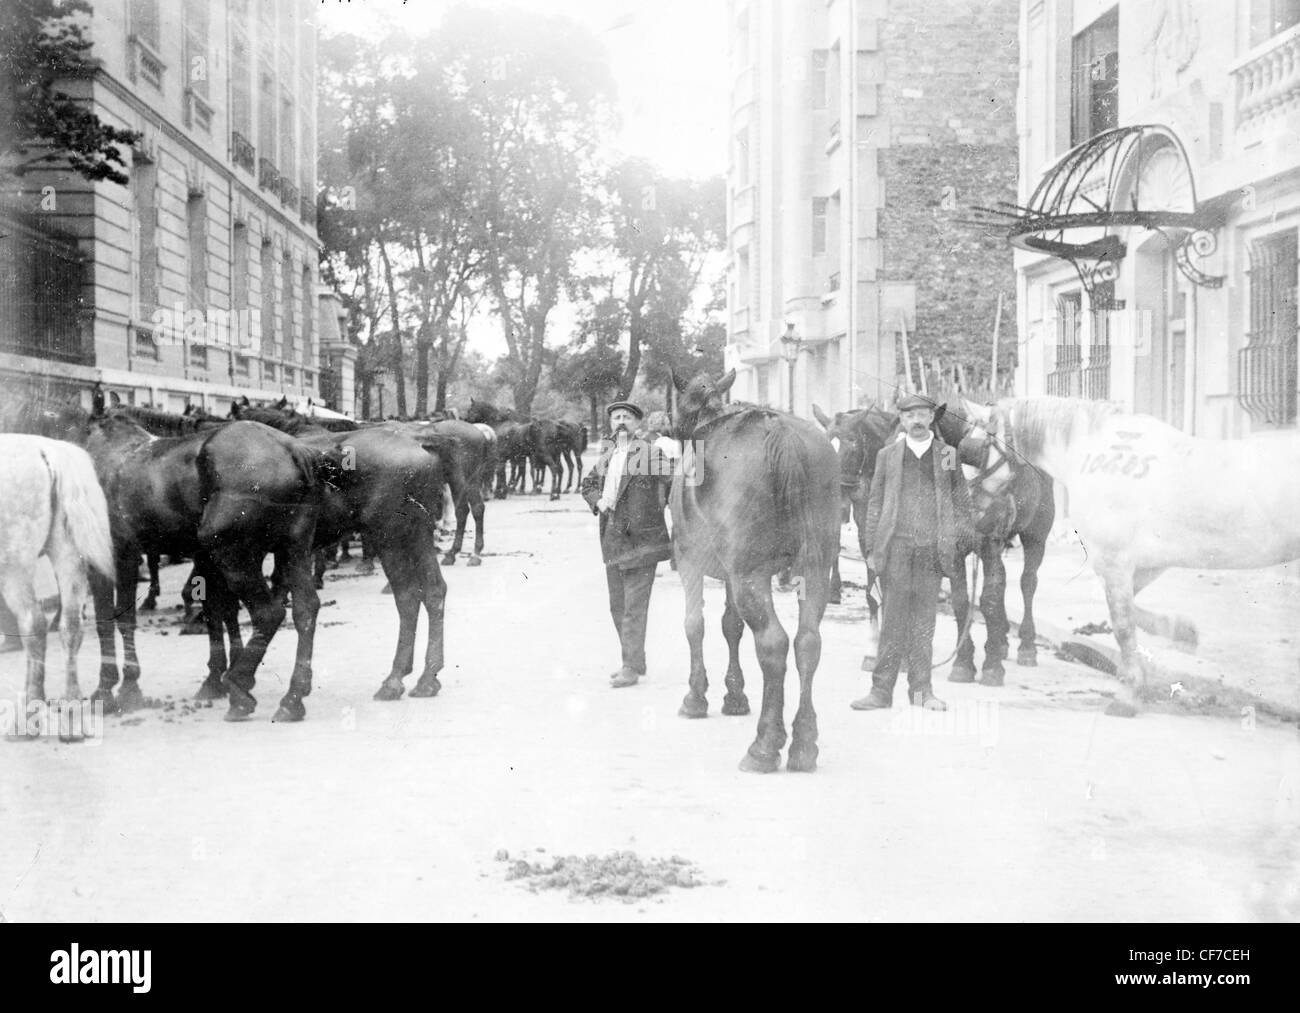 Horses requisitioned for the war effort during World War I, Paris, France. Stock Photo